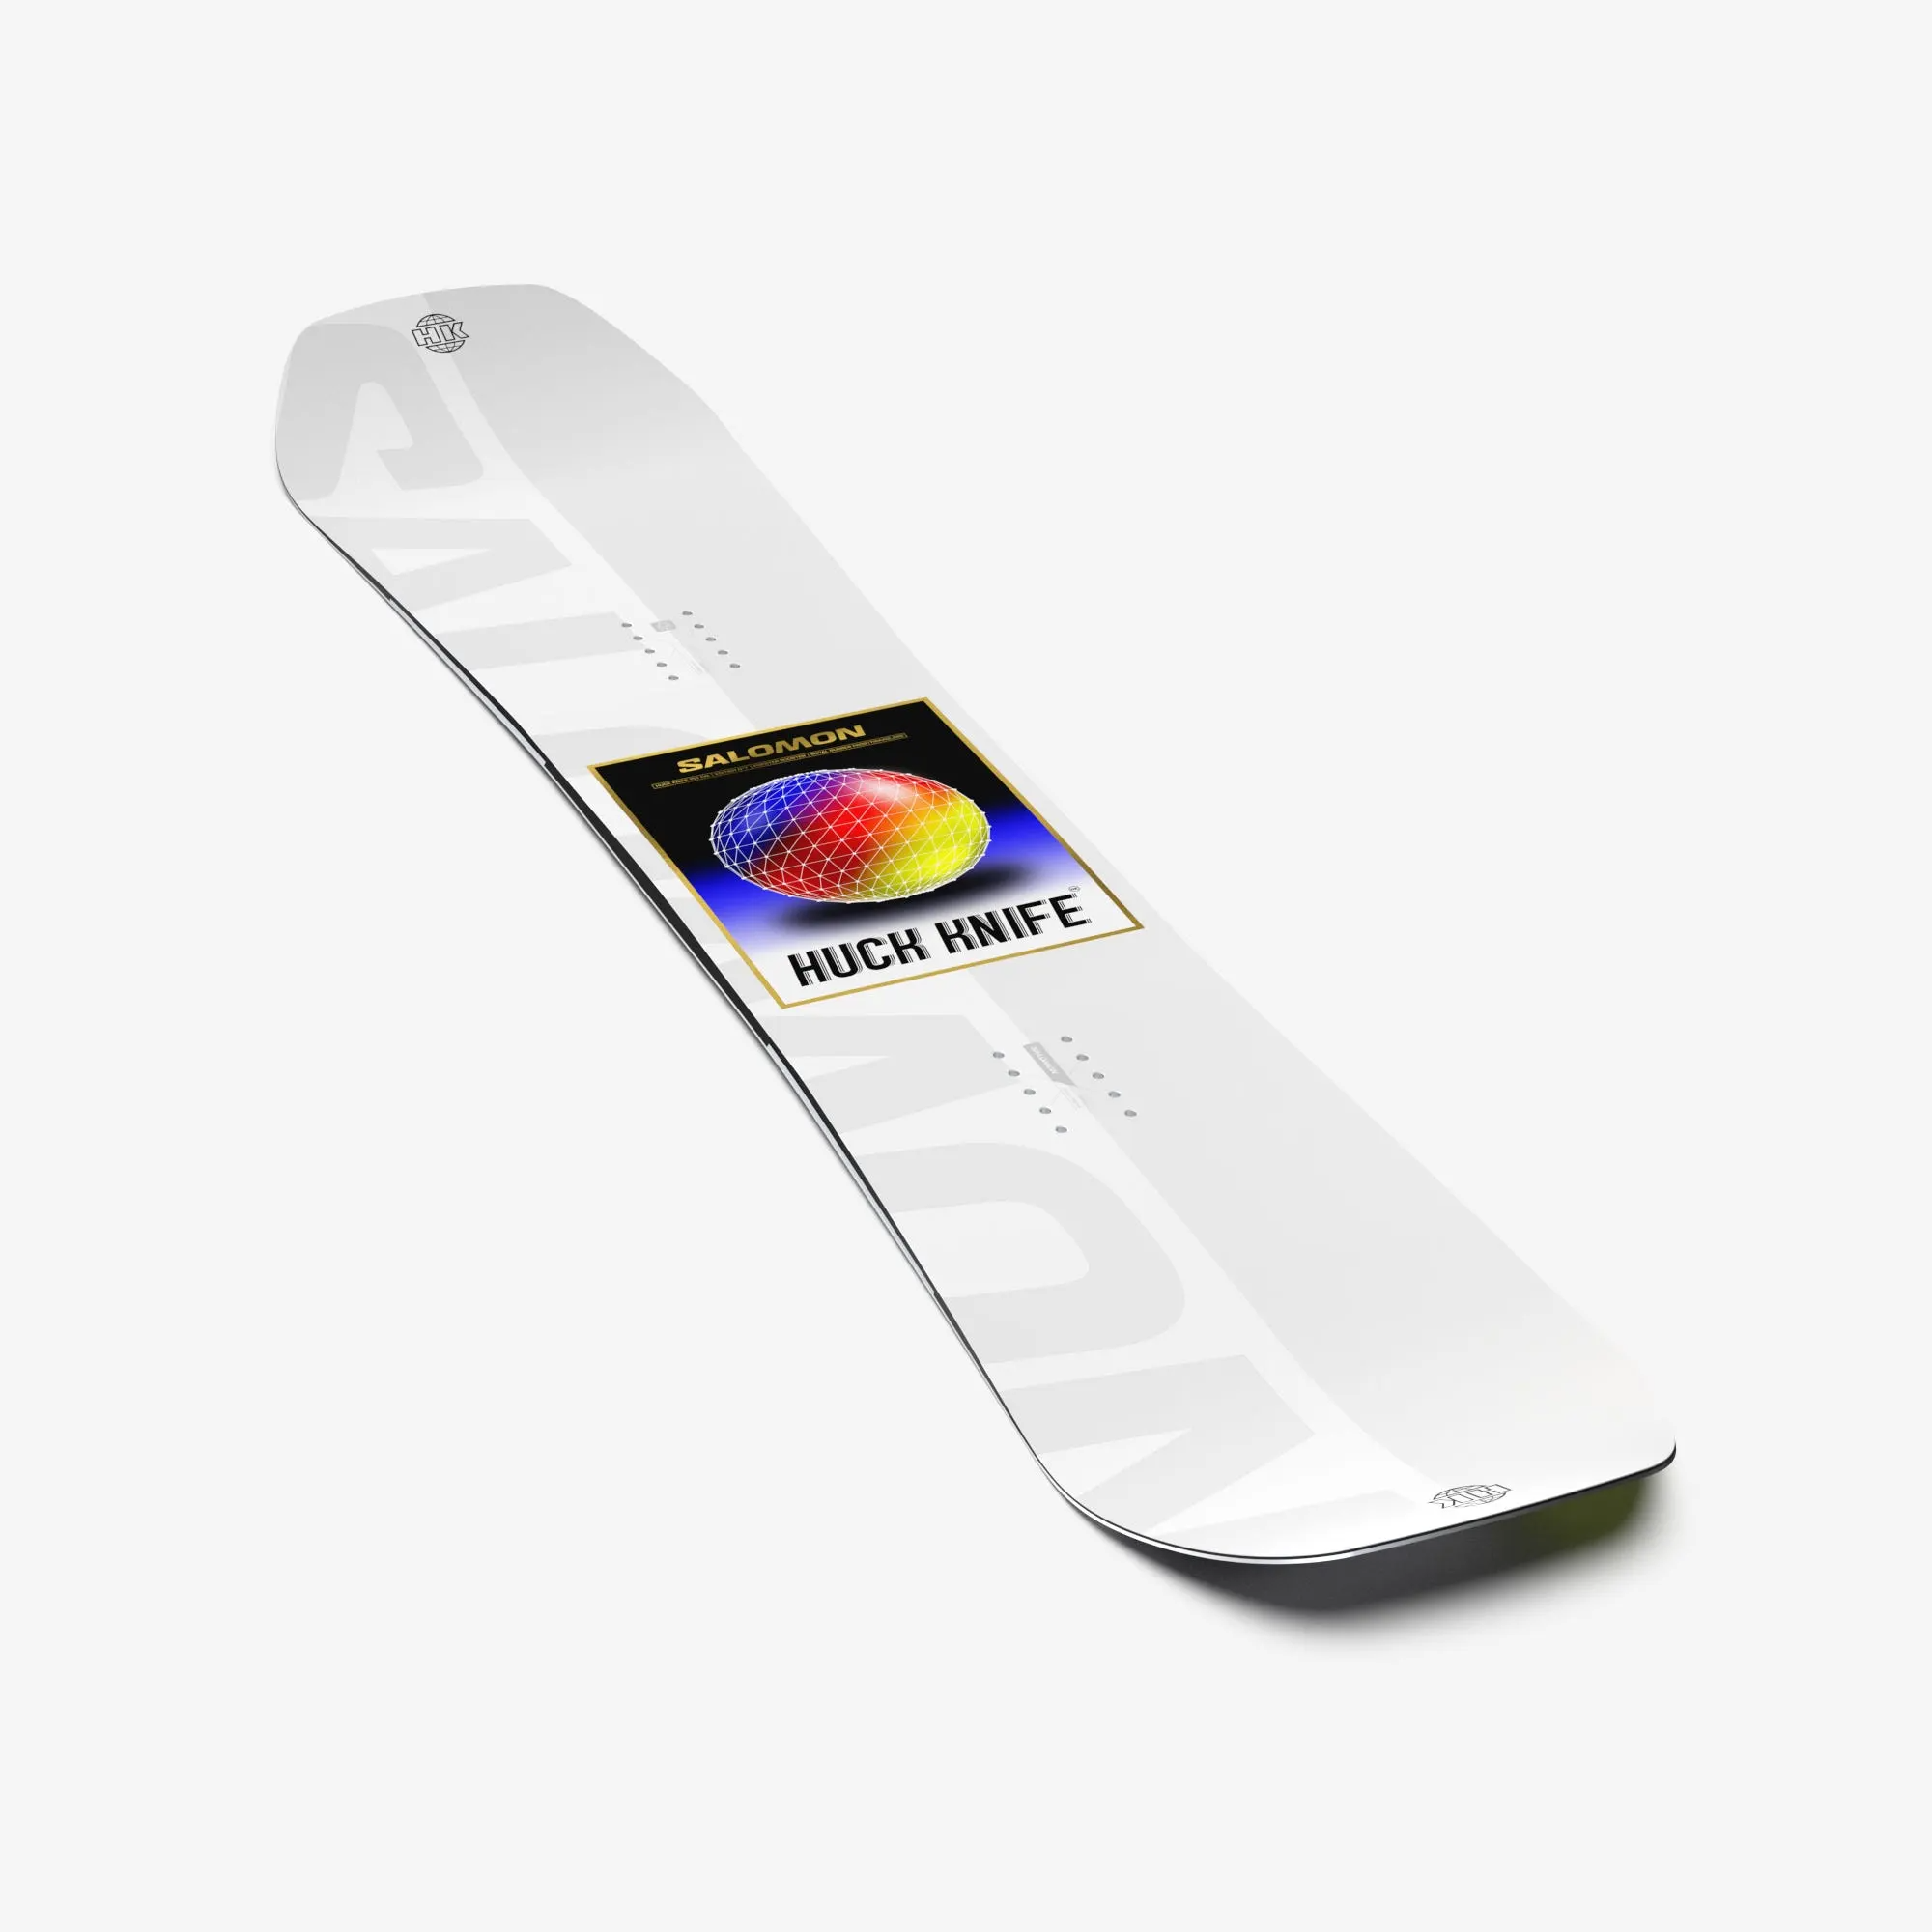 The Huck Knife is a true twin freestyle snowboard built for jumps, transition, and rails. This true park board features Quad Camber and a versatile flex for precise take-offs and landings. Natural flex and snap are enhanced by Popster Booster, while Royal Rubber Pads are placed in the sidewall to ensure smooth ride on firm snow and big jumps.